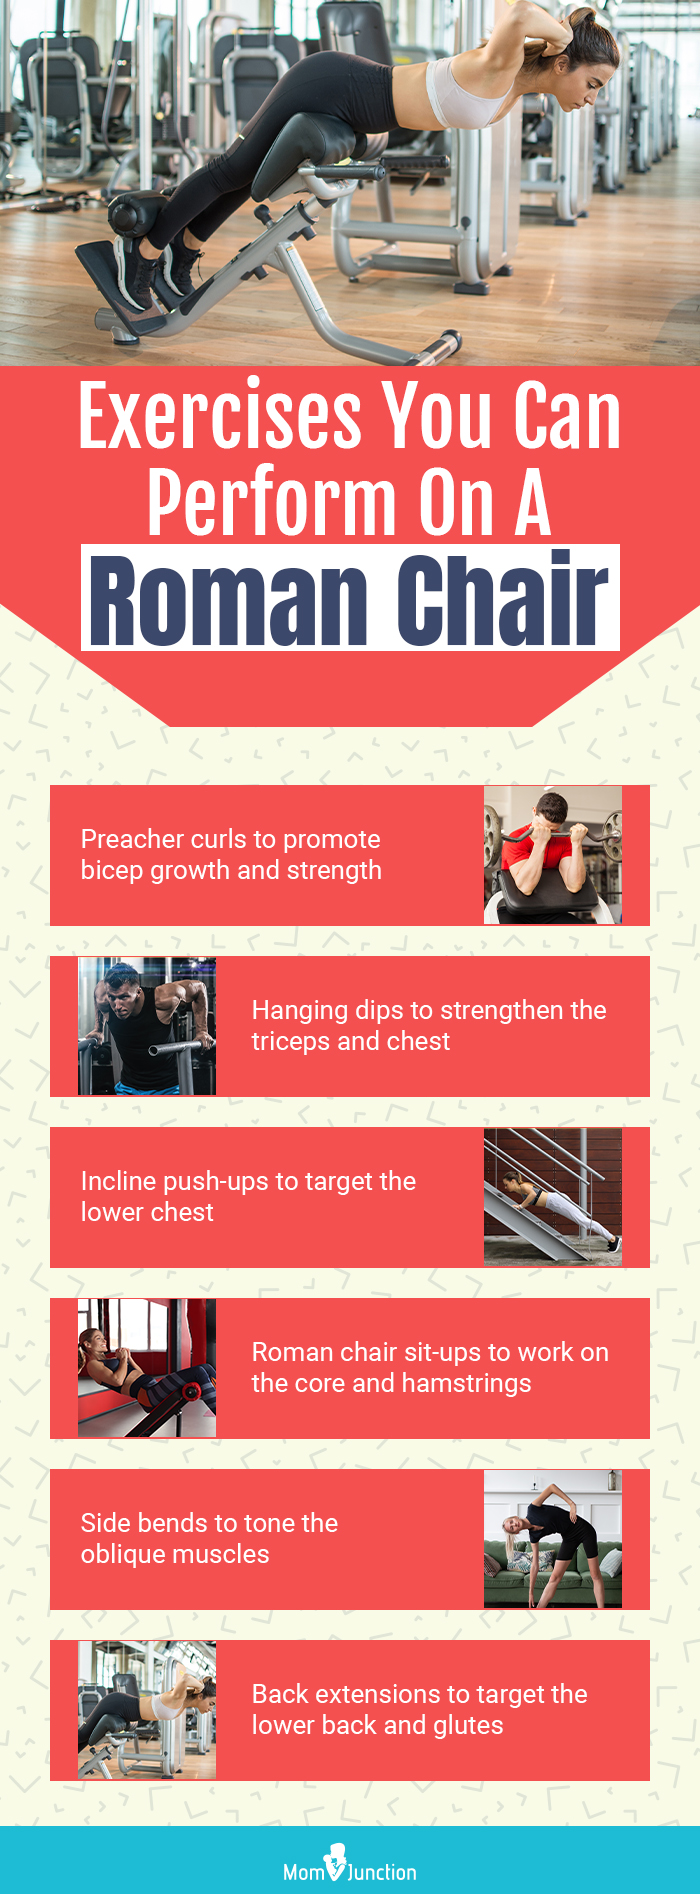 How You Can Use the Roman Chair to Get Stronger - From Core to Glute S